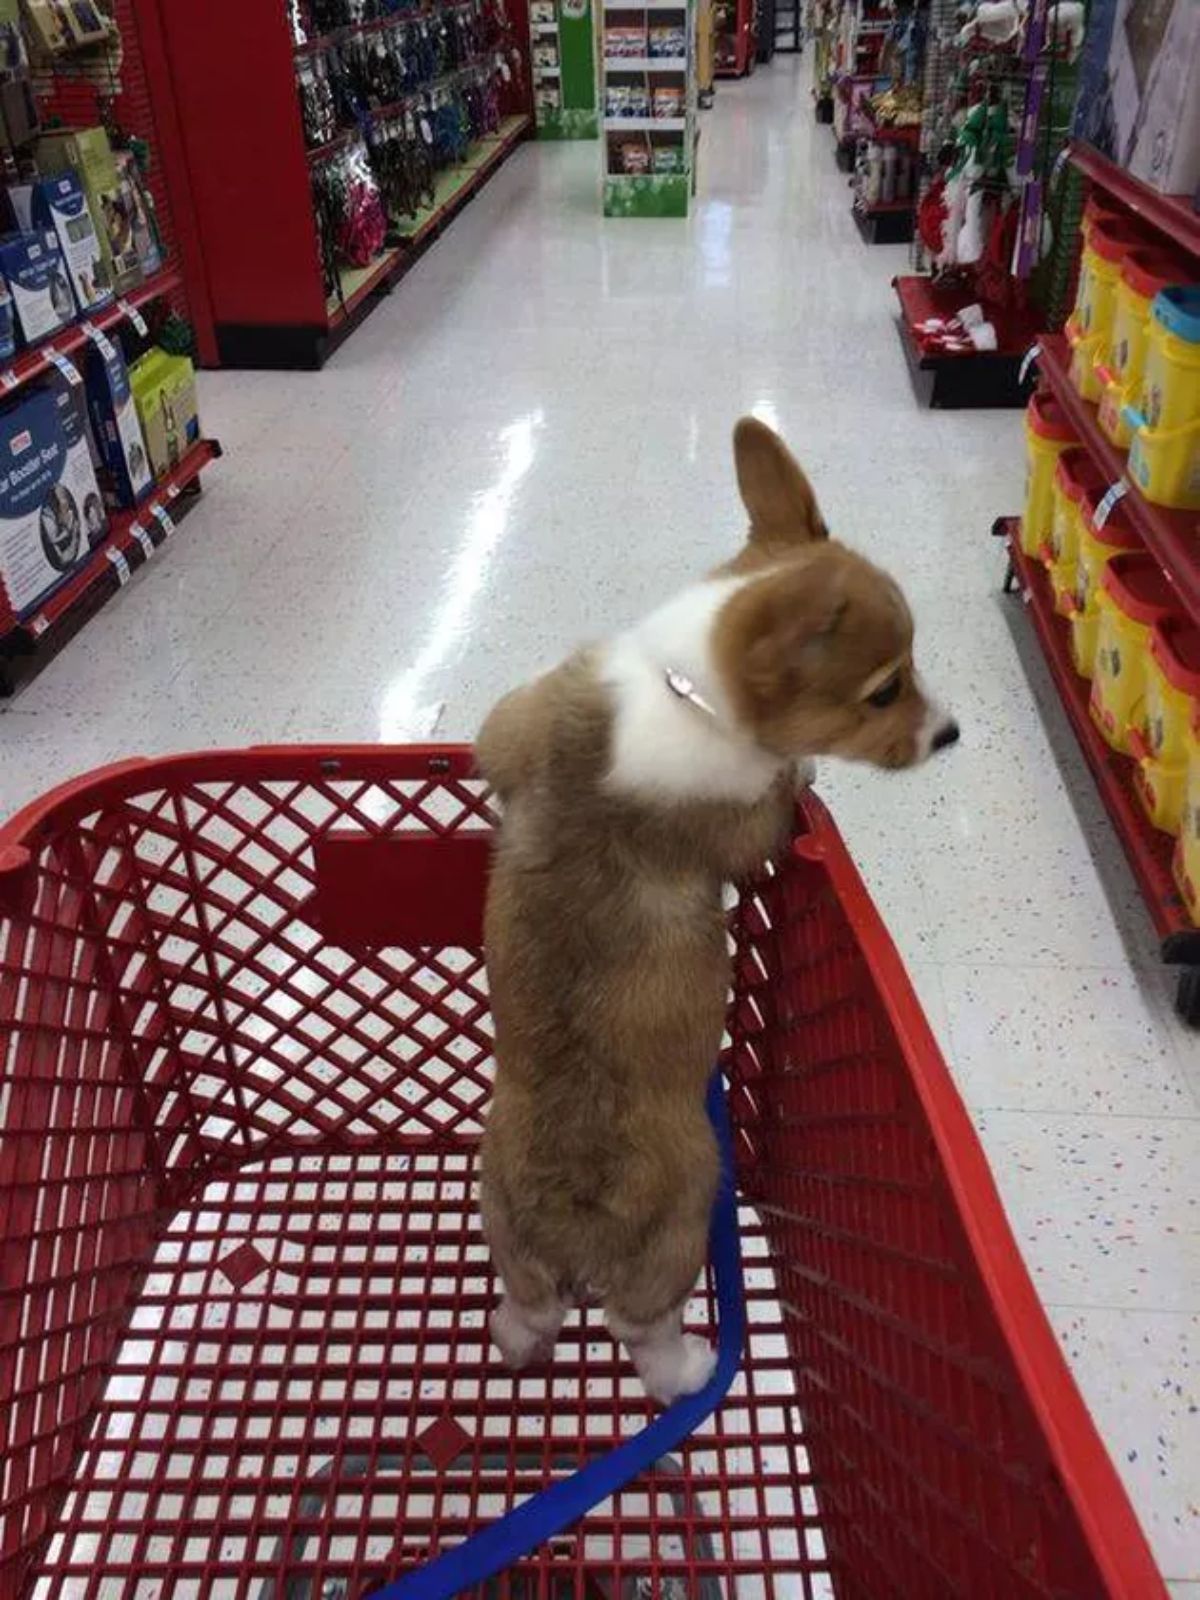 brown and white corgi puppy standing on hind legs in a red trolley inside a store